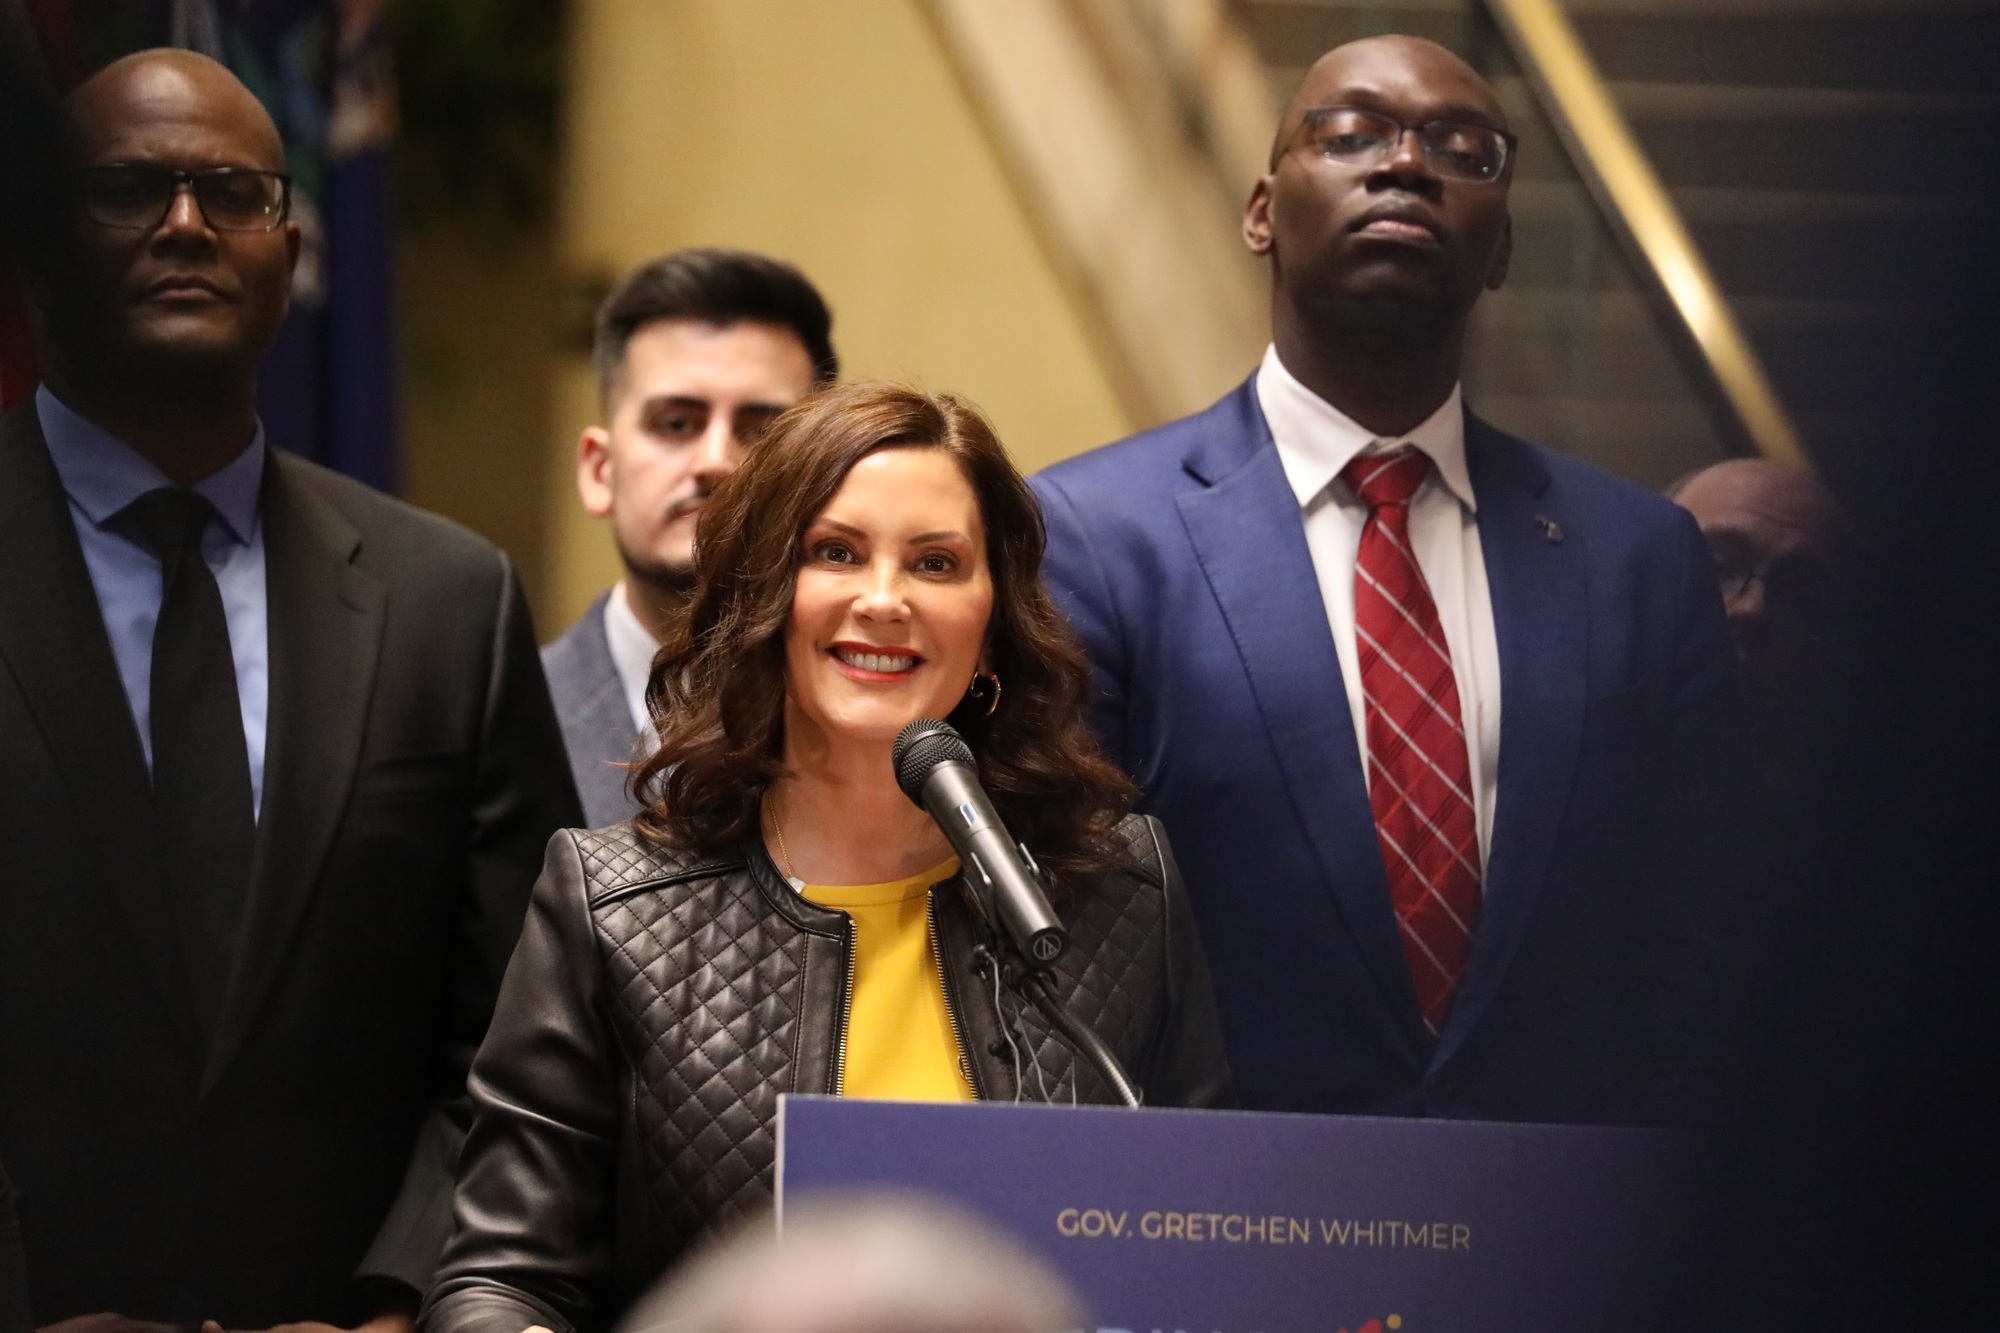 Pension tax repeal on deck, Whitmer and legislative leaders announce